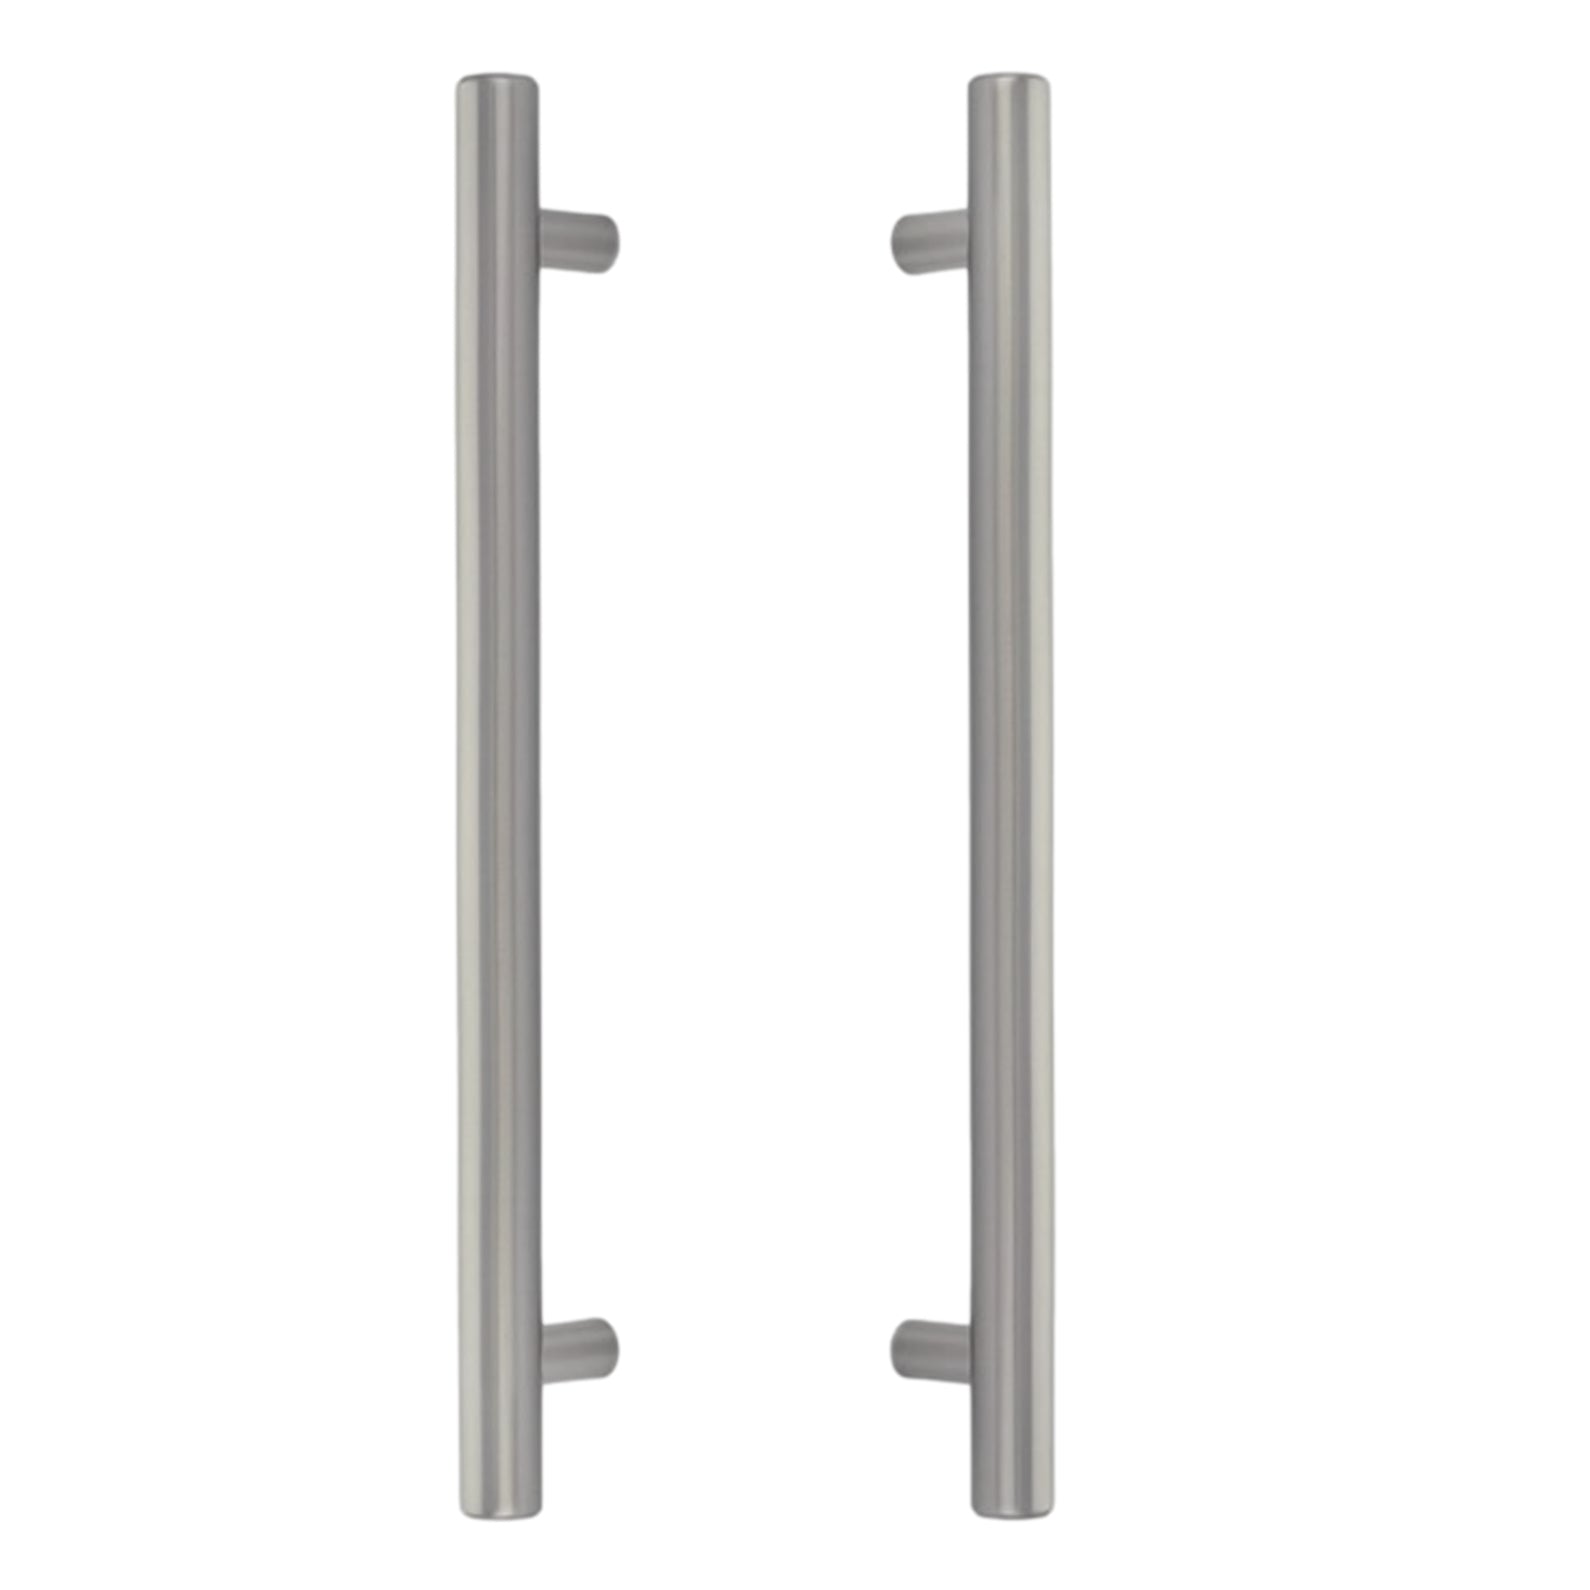 Door Pulls 12" Handle Back to Back Hardware for Interior Sliding and Barn Doors - Industry Hardware